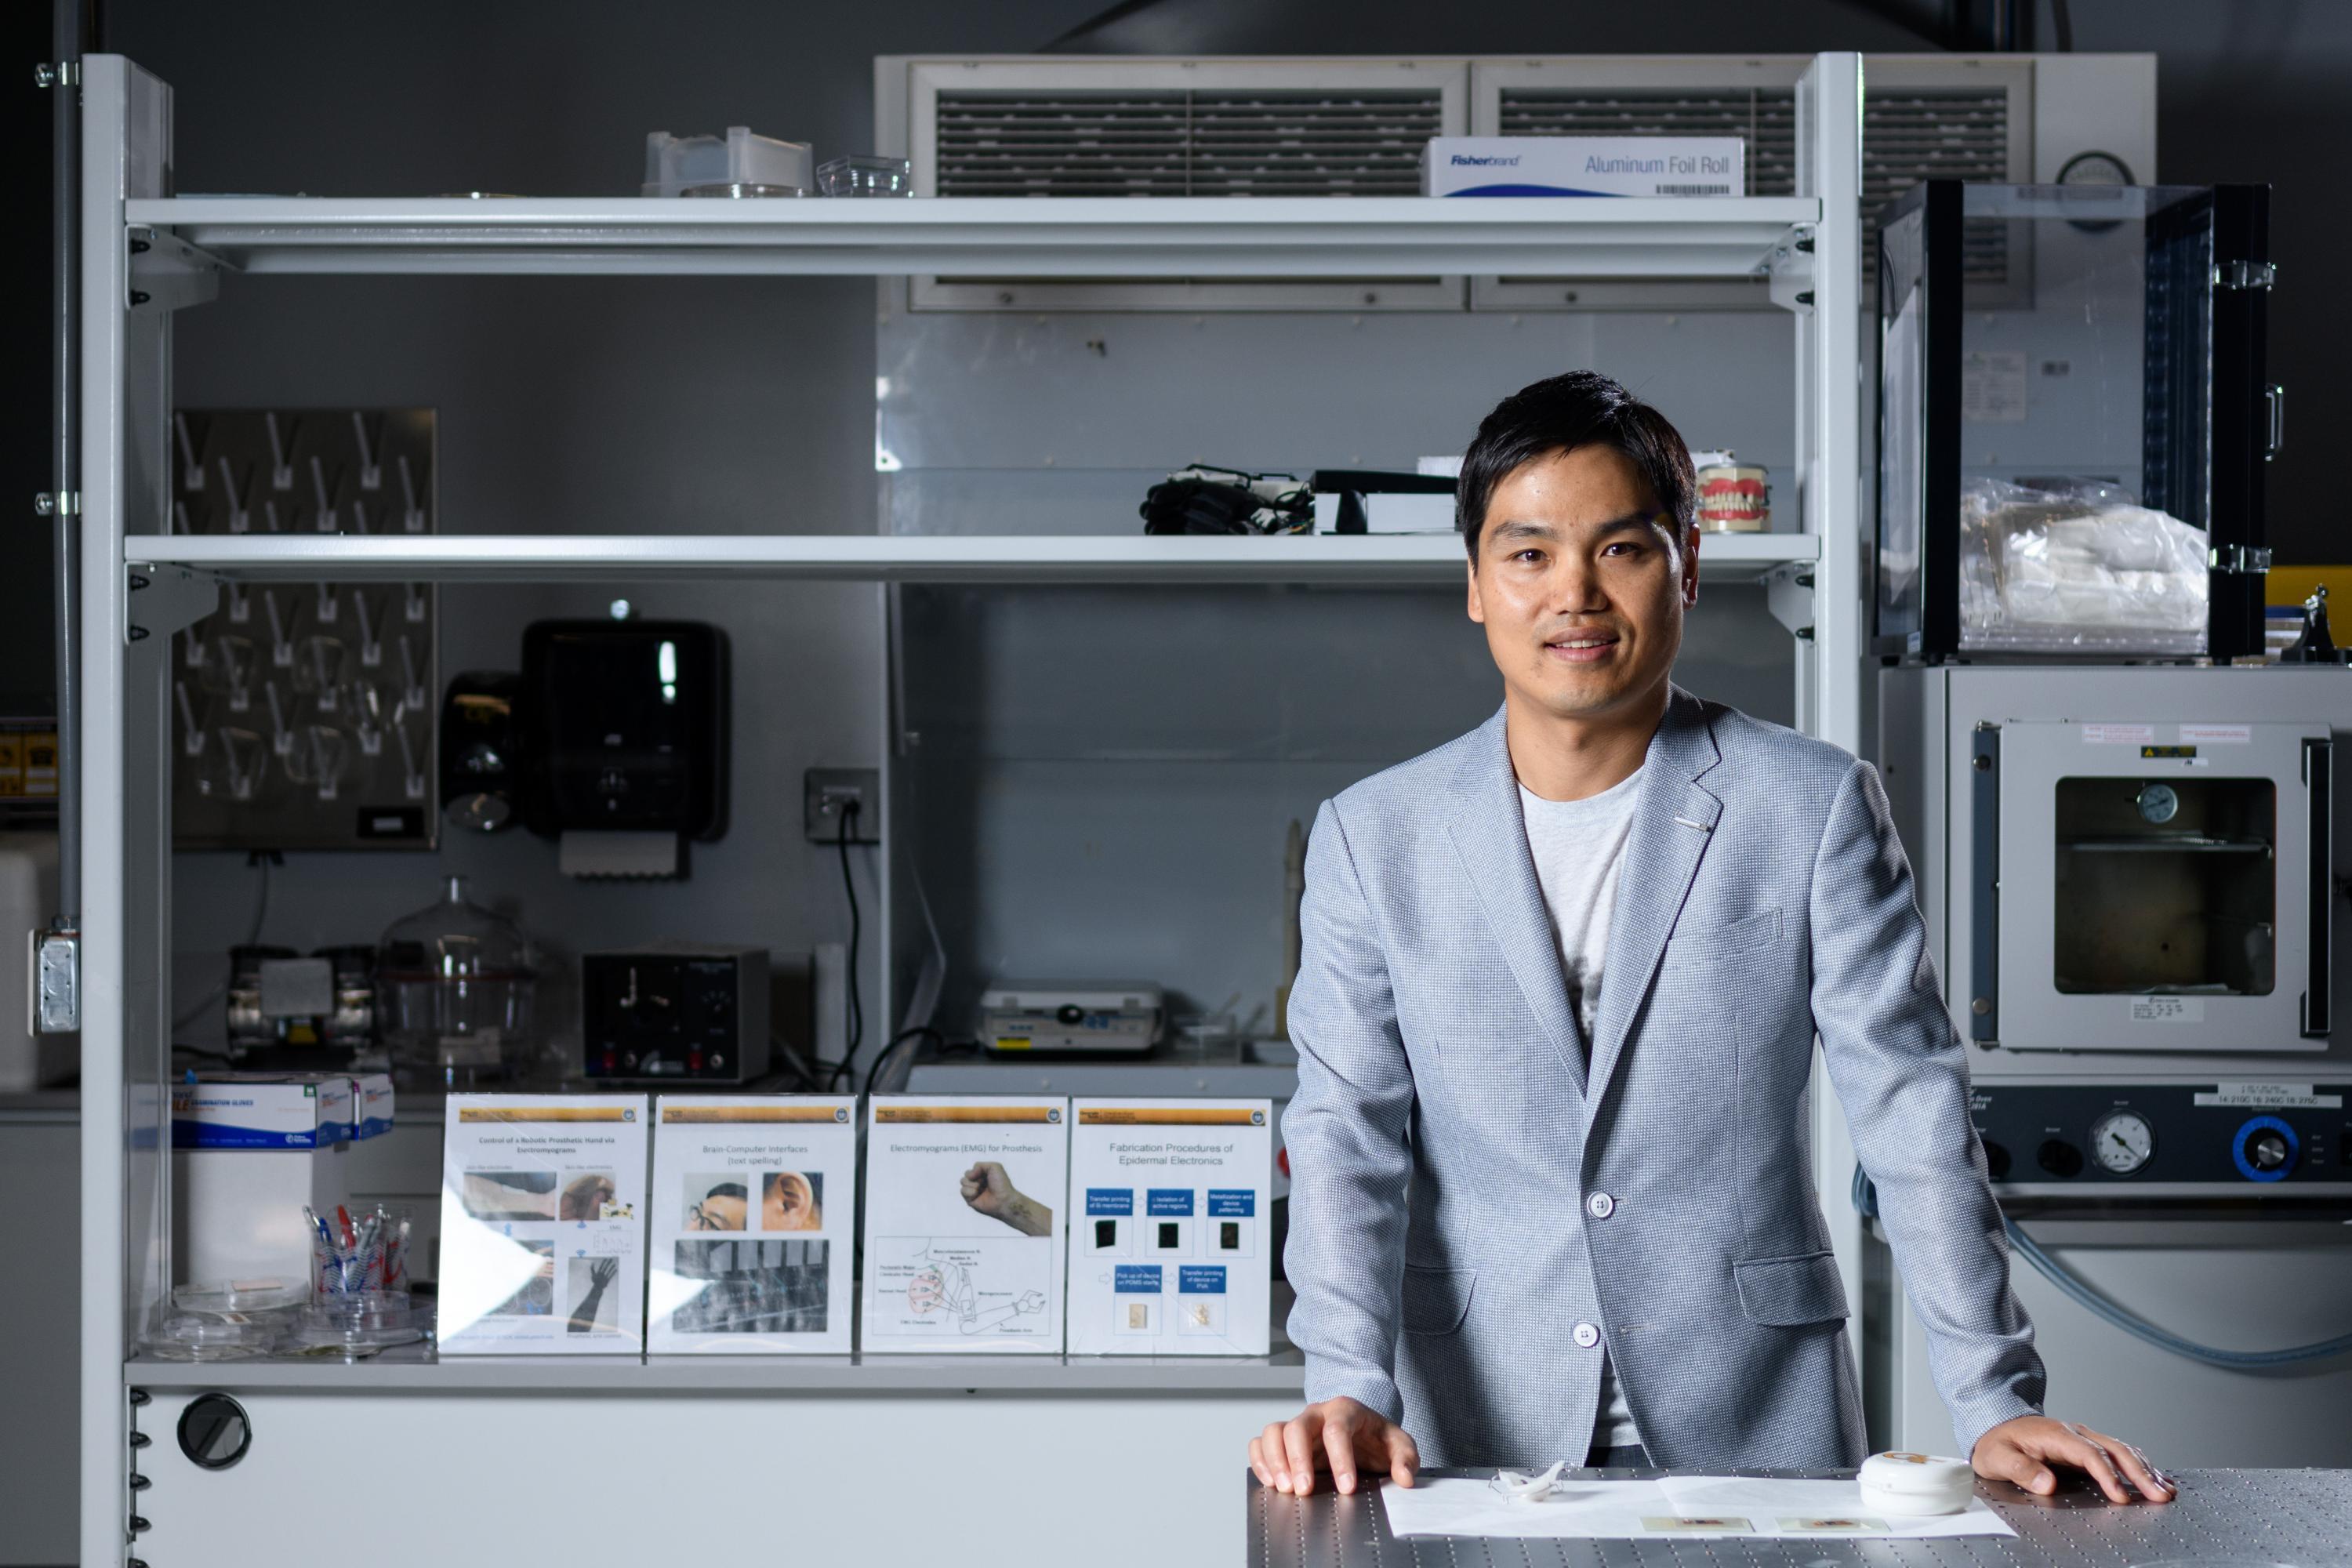 The lab of Woon-Hong Yeo has opened a new area of research in biomedical engineering with a novel technology: soft, wearable electronics for health monitoring and human-machine interfaces.